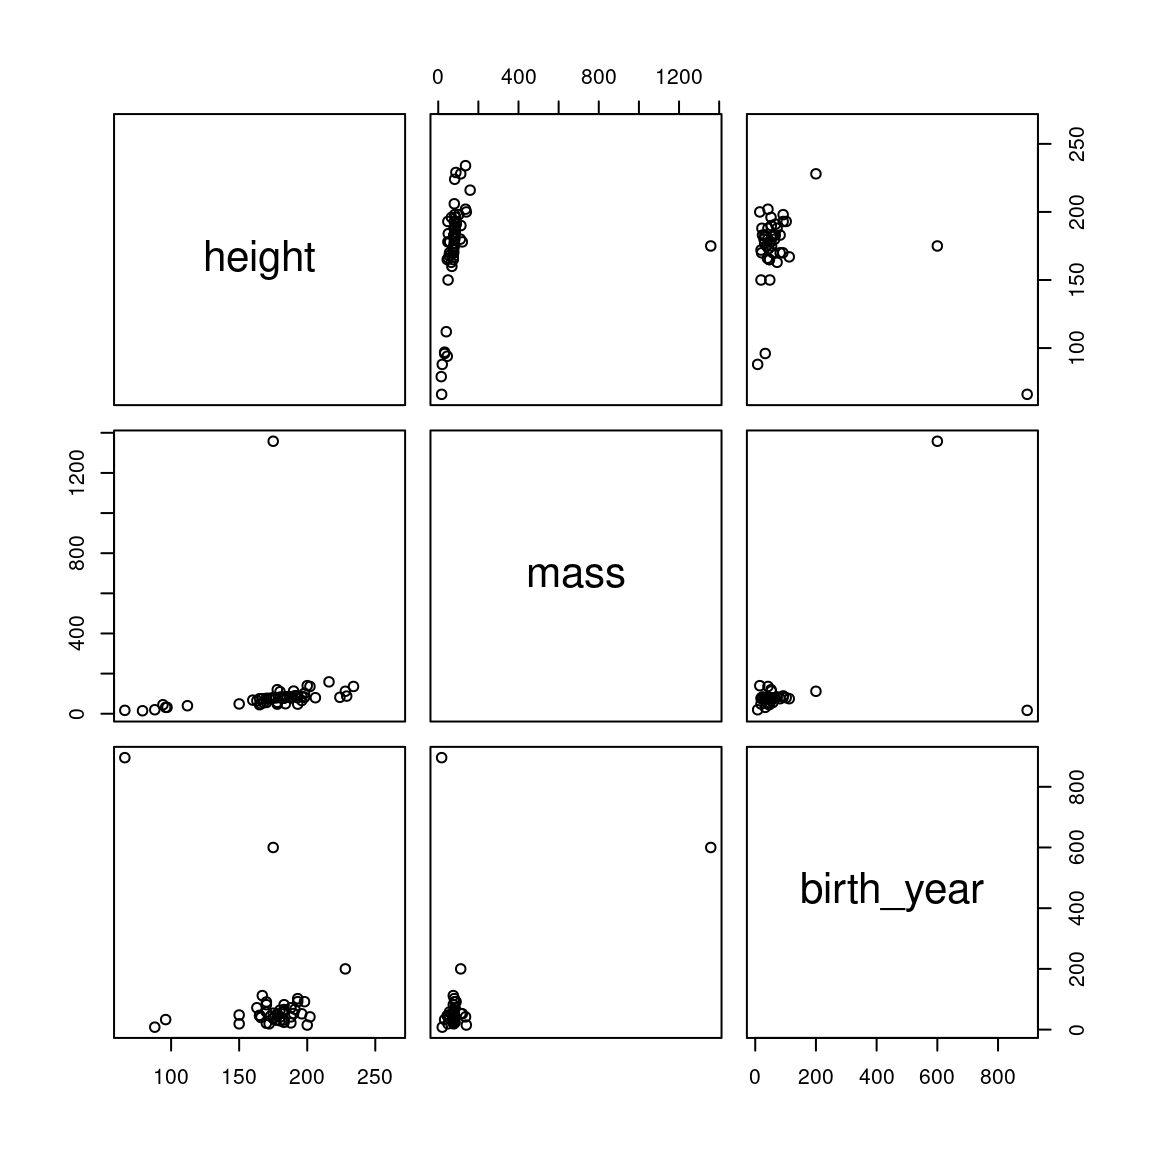 Pairwise correlations for the starwars dataset